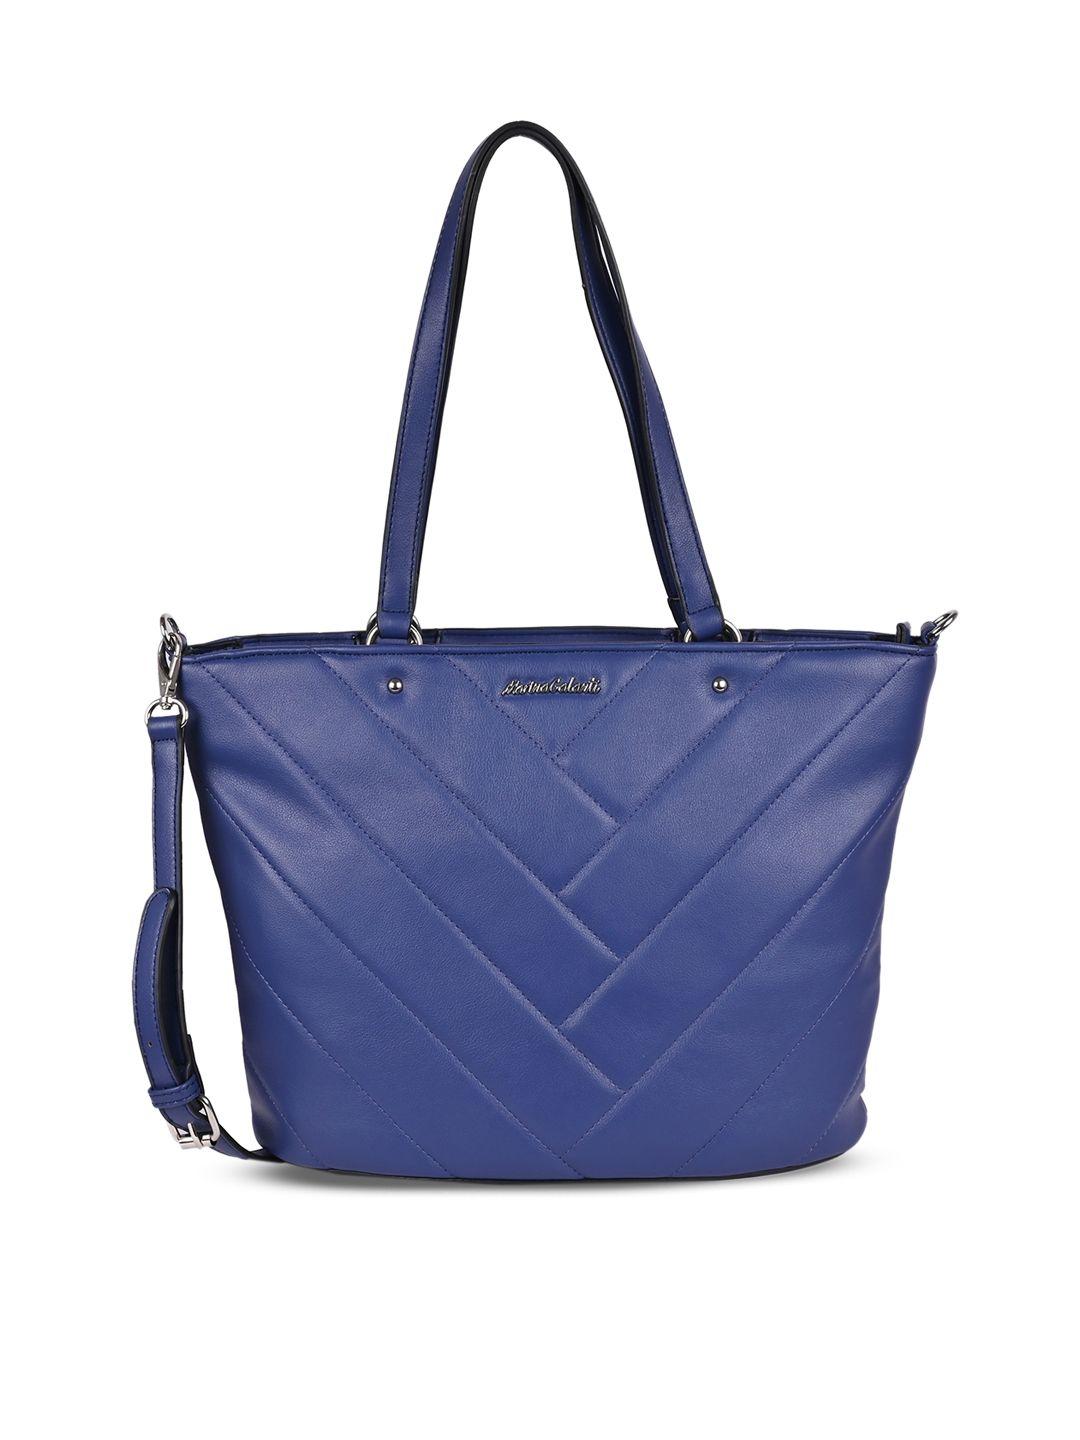 marina galanti blue pu structured sling bag with quilted